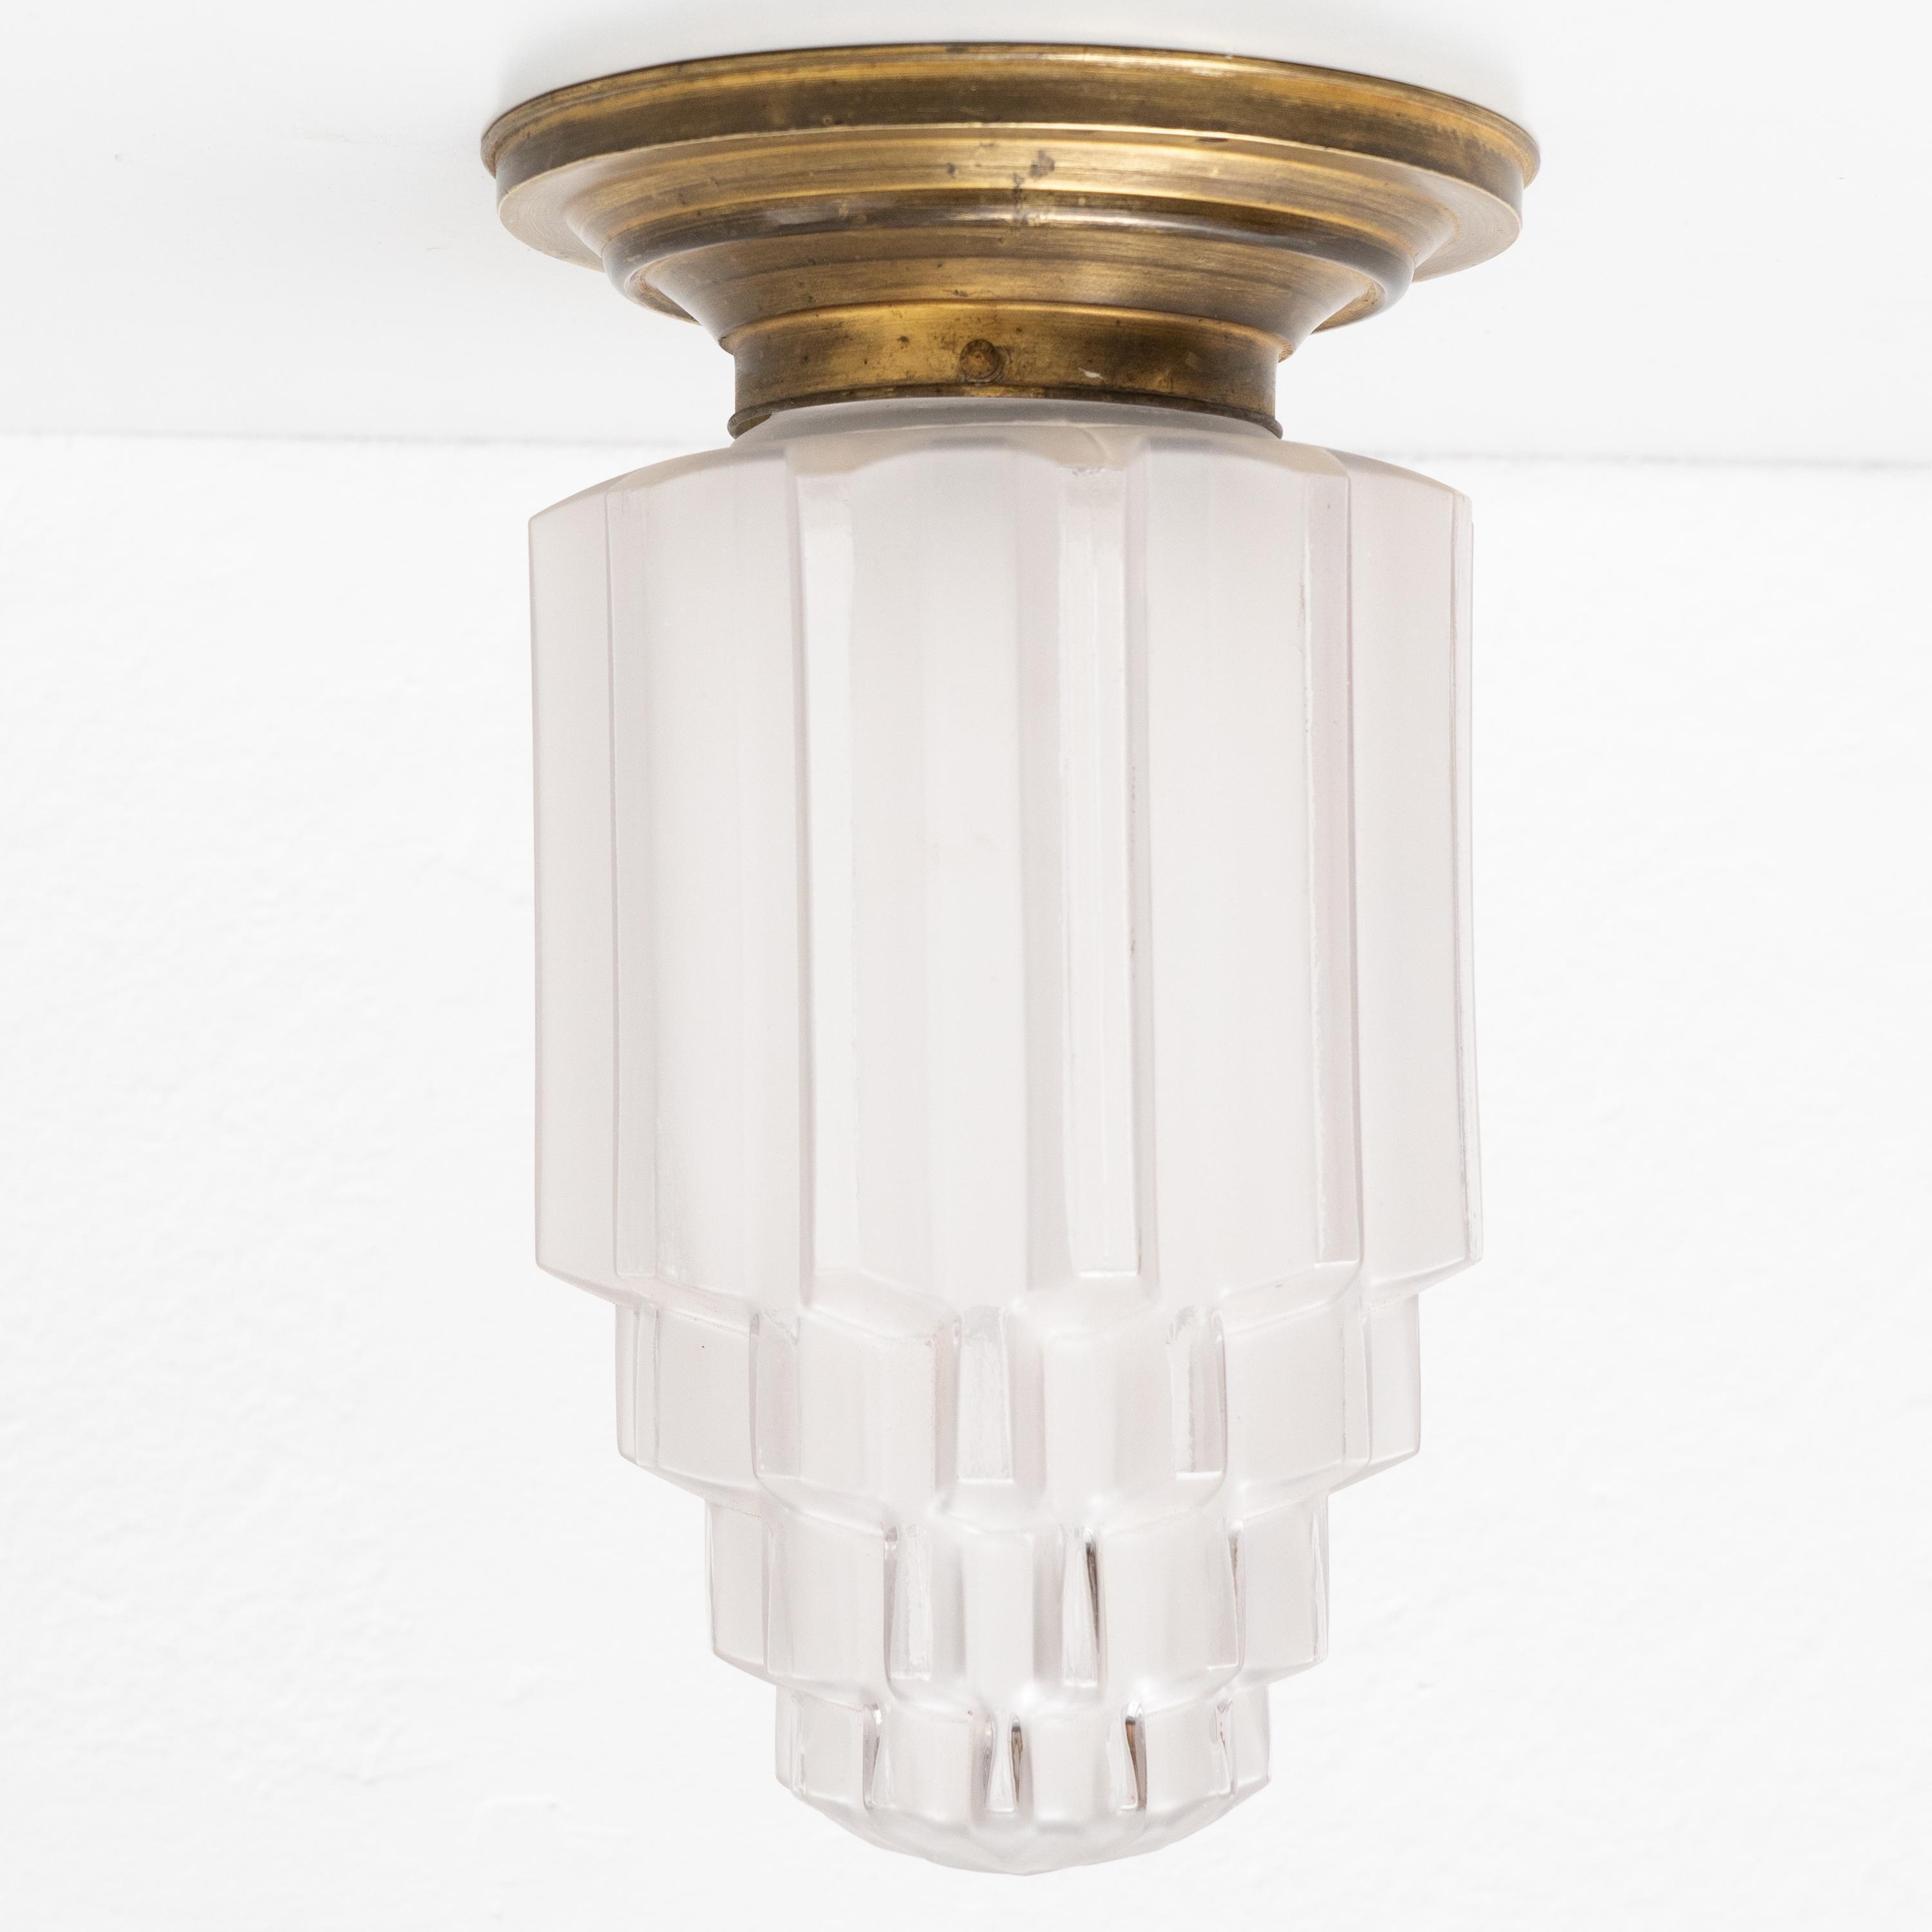 Vintage Art Deco Brass and Glass Ceiling Lamp, circa 1940 In Good Condition For Sale In Barcelona, Barcelona